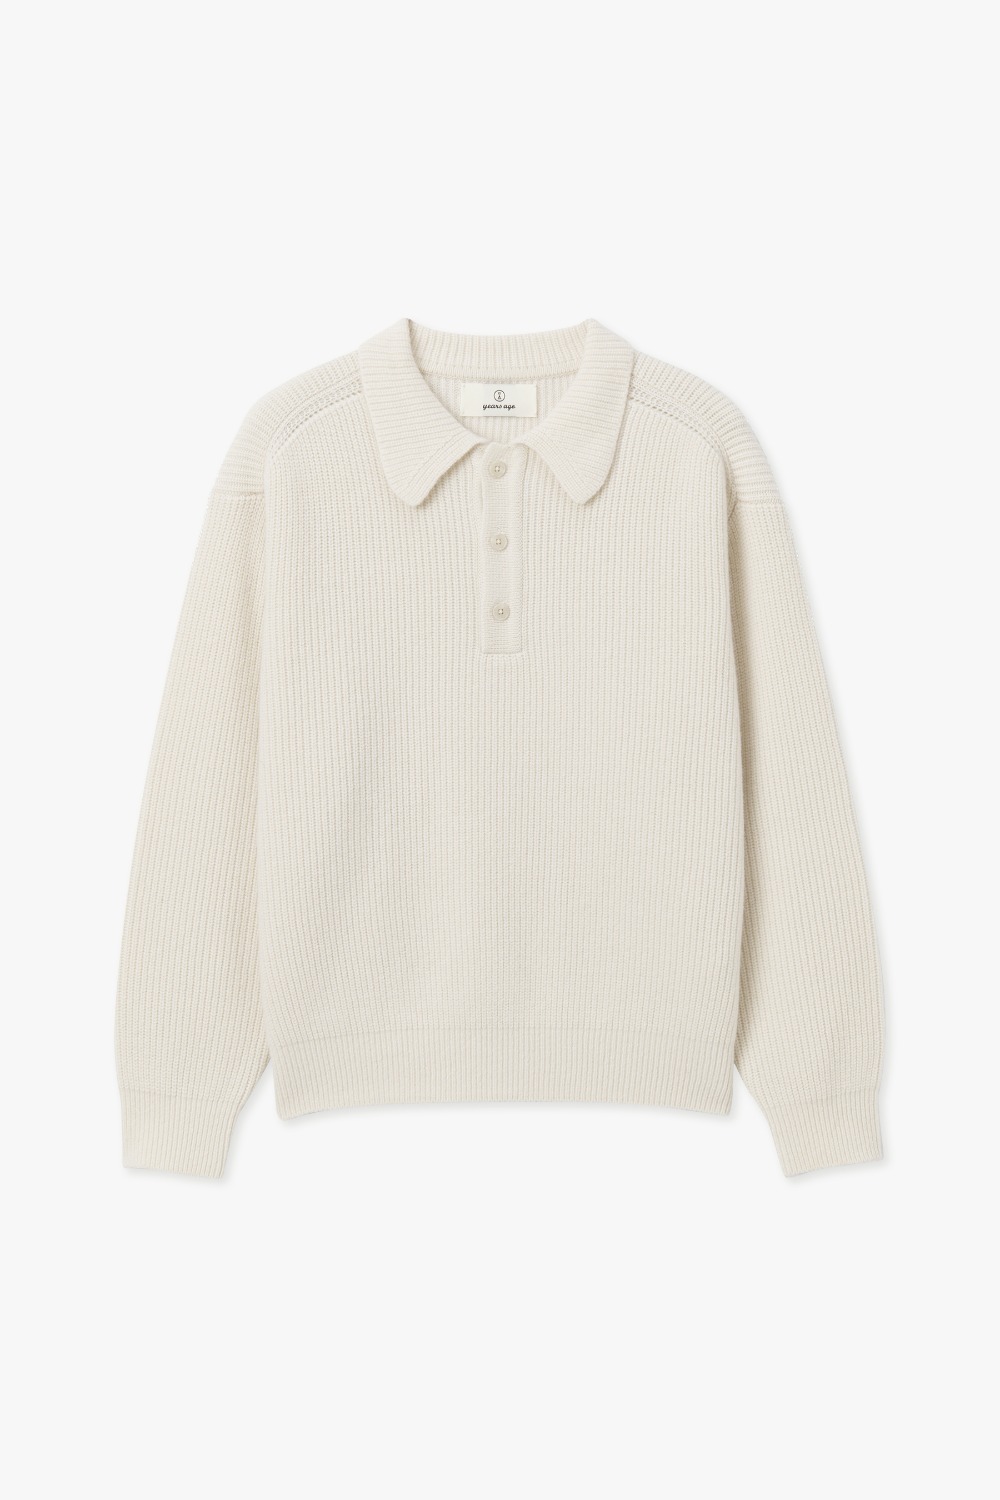 IVORY ROVER WOOL KNIT COLLAR SHIRT